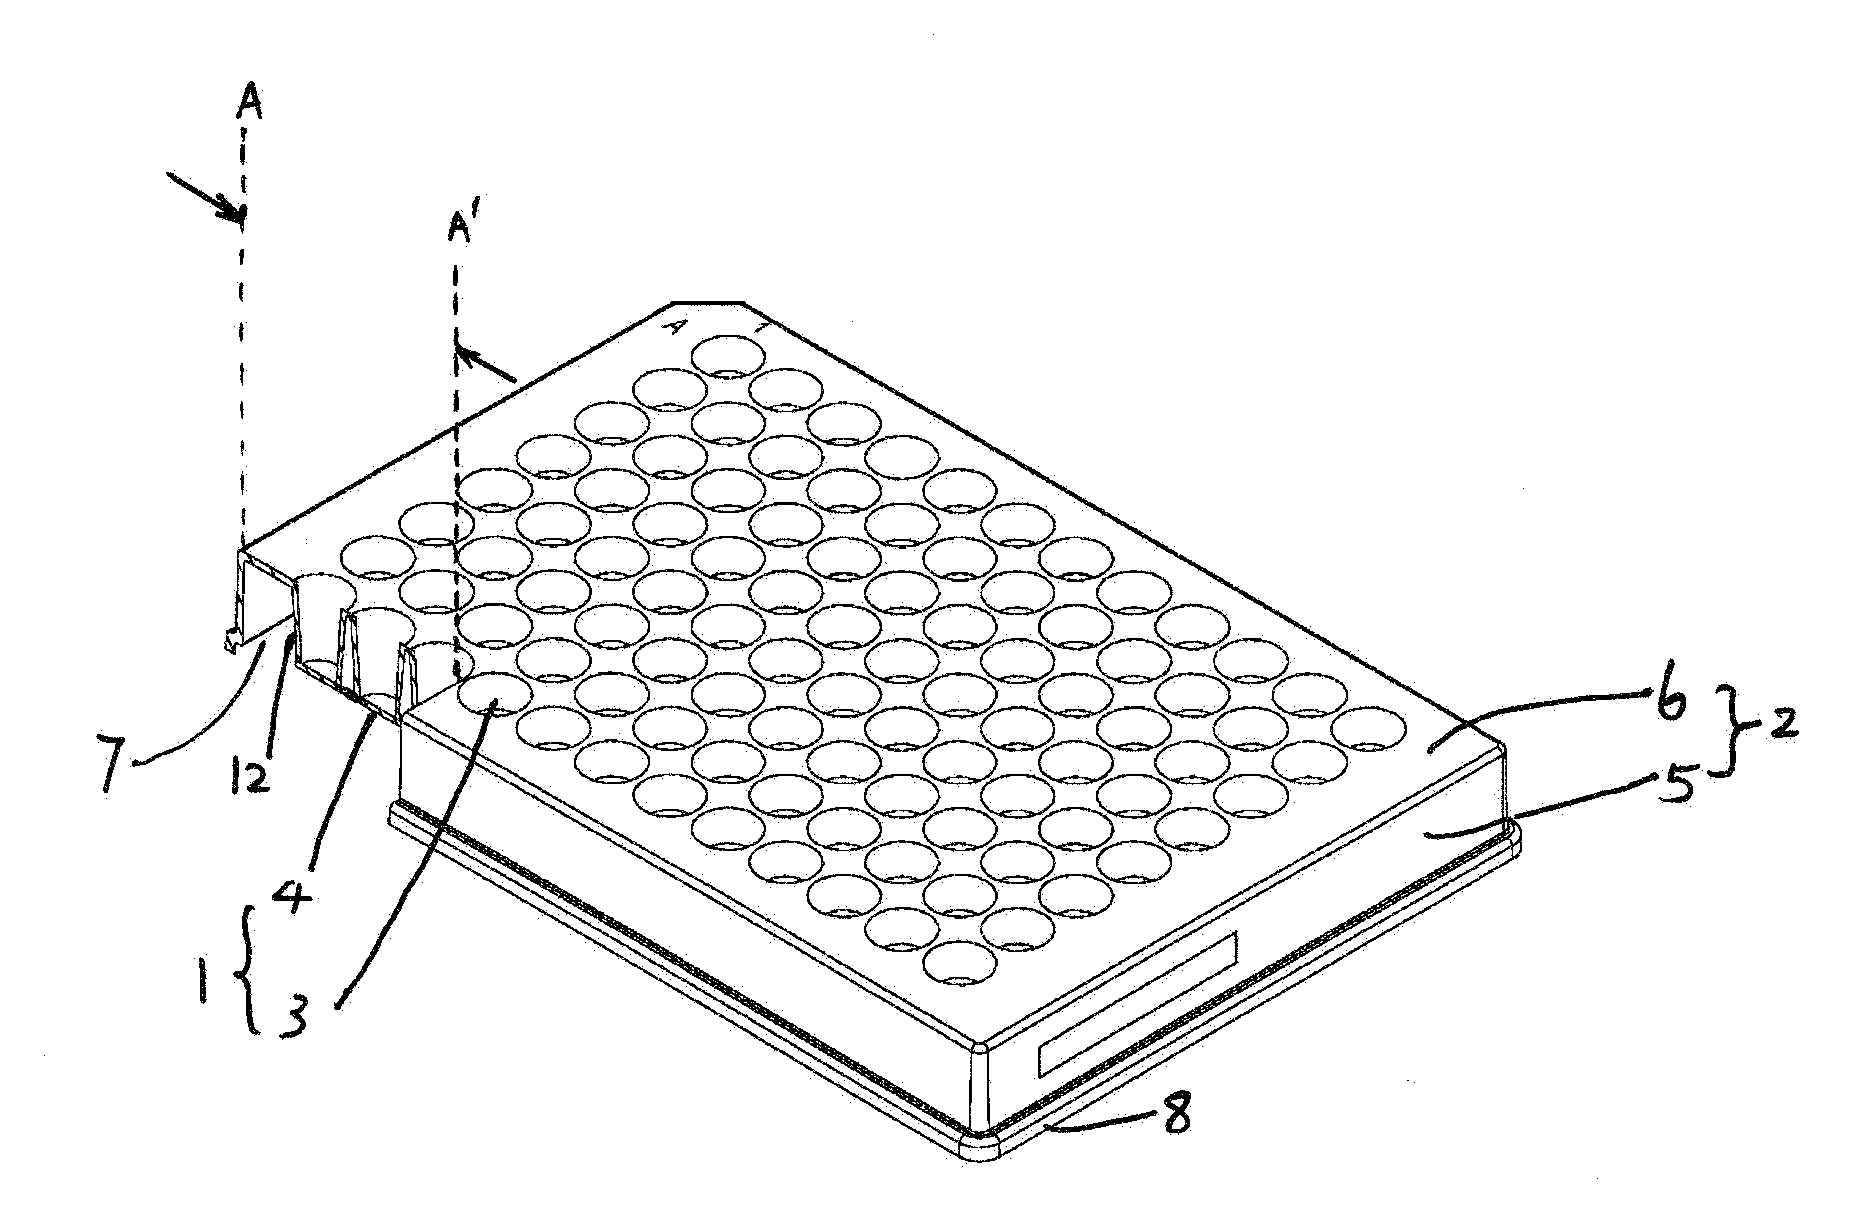 Microplate with fewer peripheral artifacts